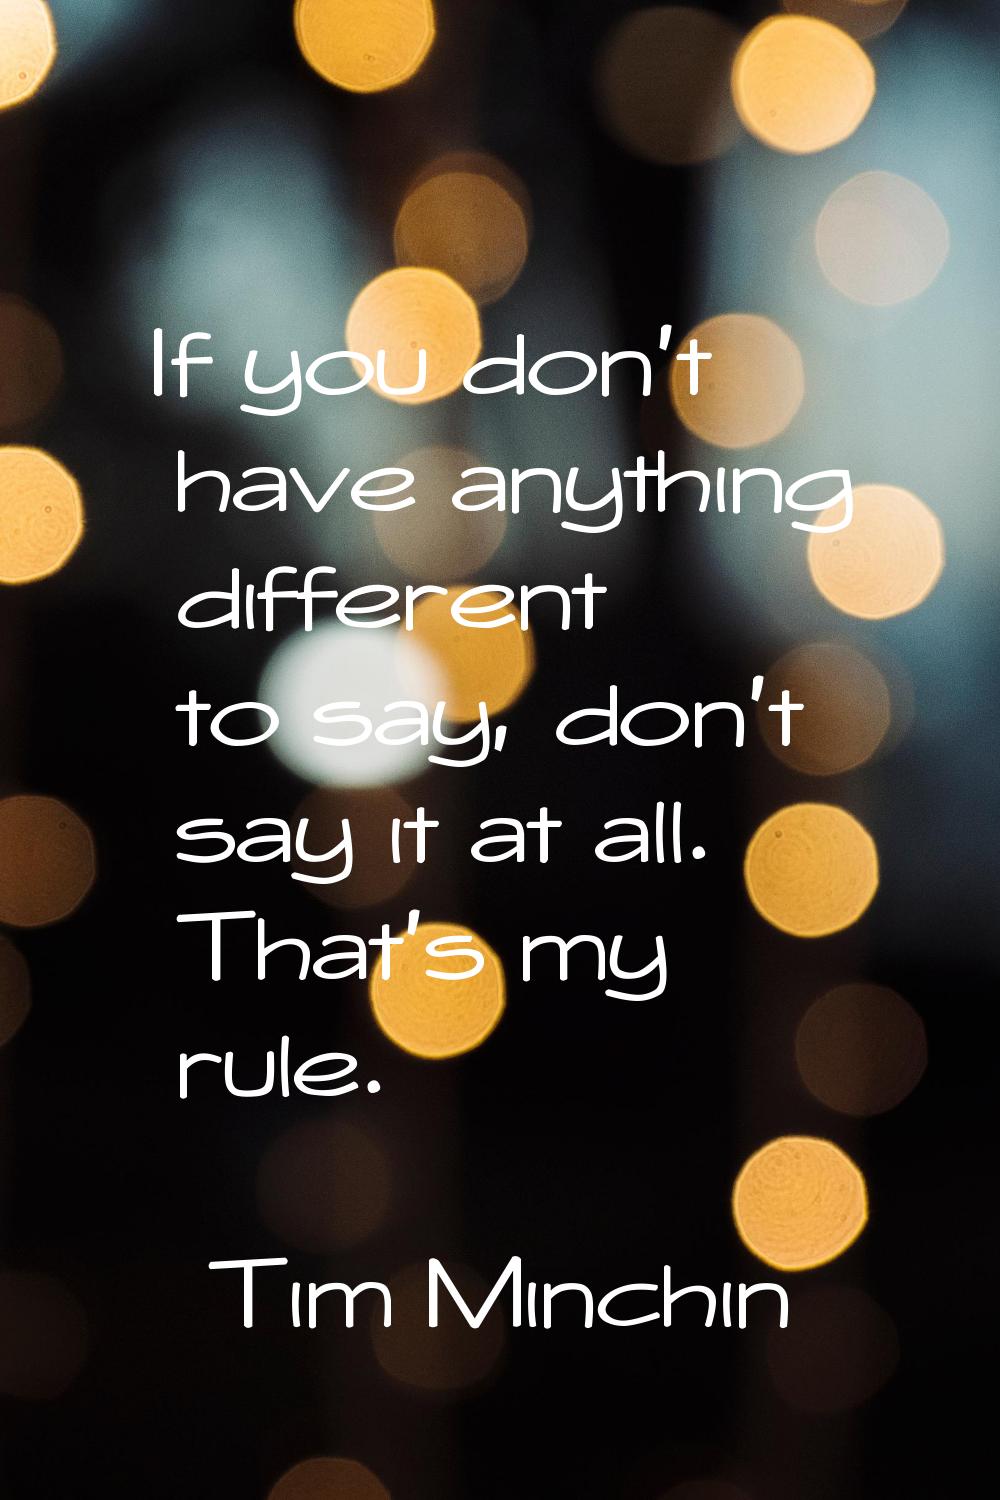 If you don't have anything different to say, don't say it at all. That's my rule.